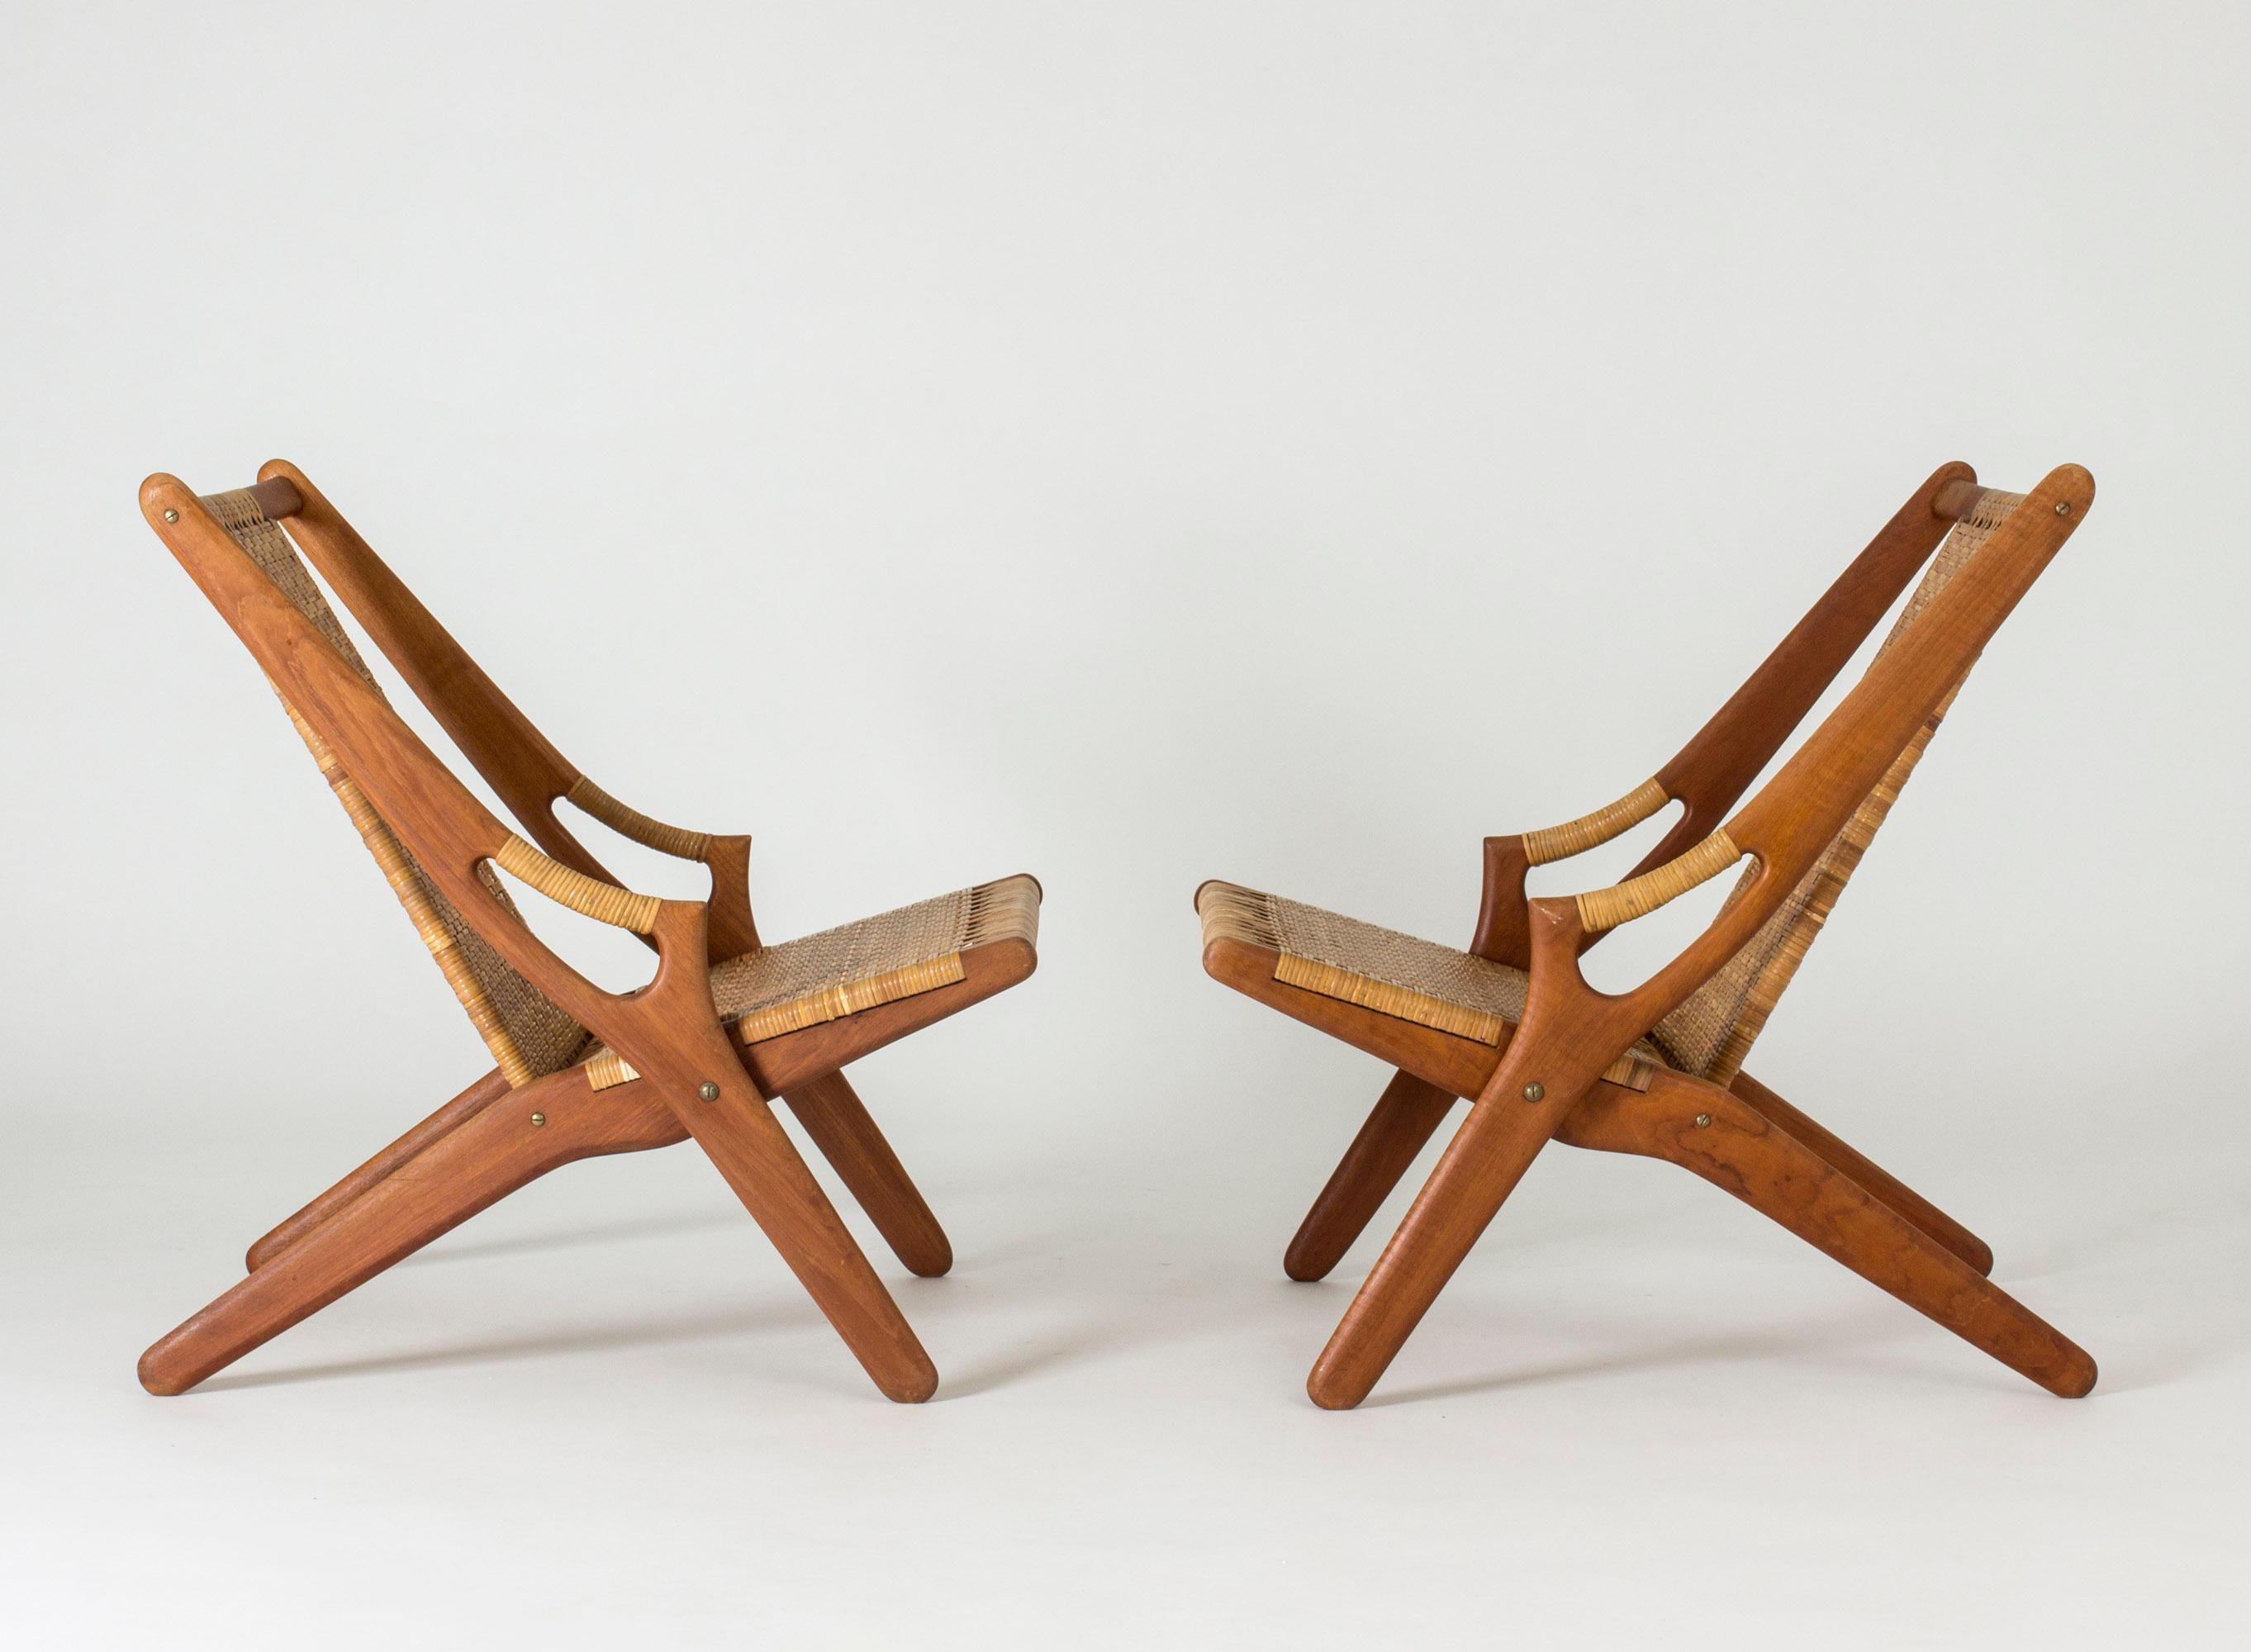 Pair of stunning teak and rattan lounge chairs by Arne Hovmand Olsen. Great silhouette with the sculpted handles often seen in Hovmand Olsen’s chairs.